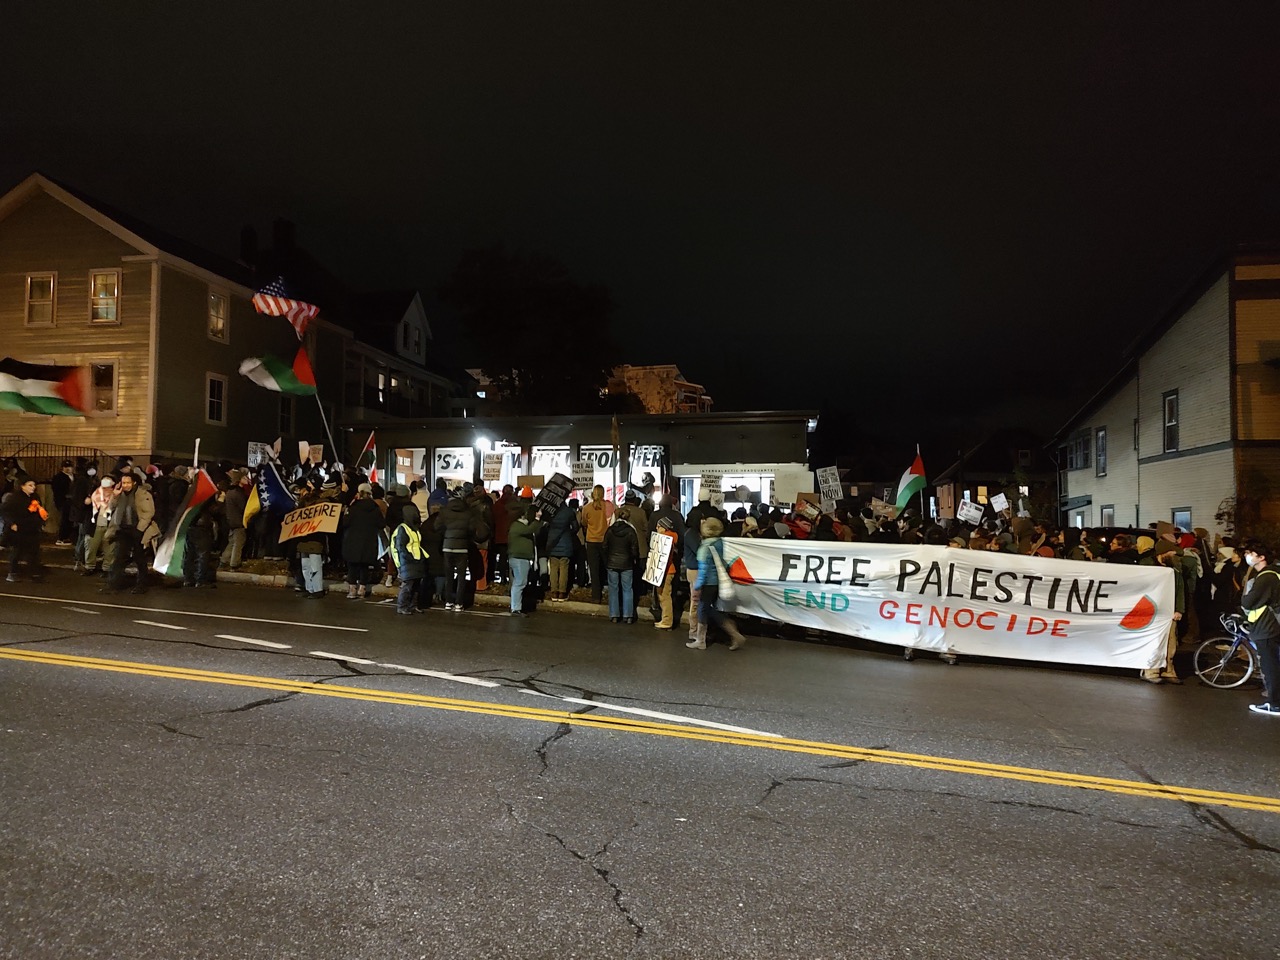 Pro-Palestinian protesters target Balint fundraiser in Burlington, calling  for cease-fire in Gaza - VTDigger